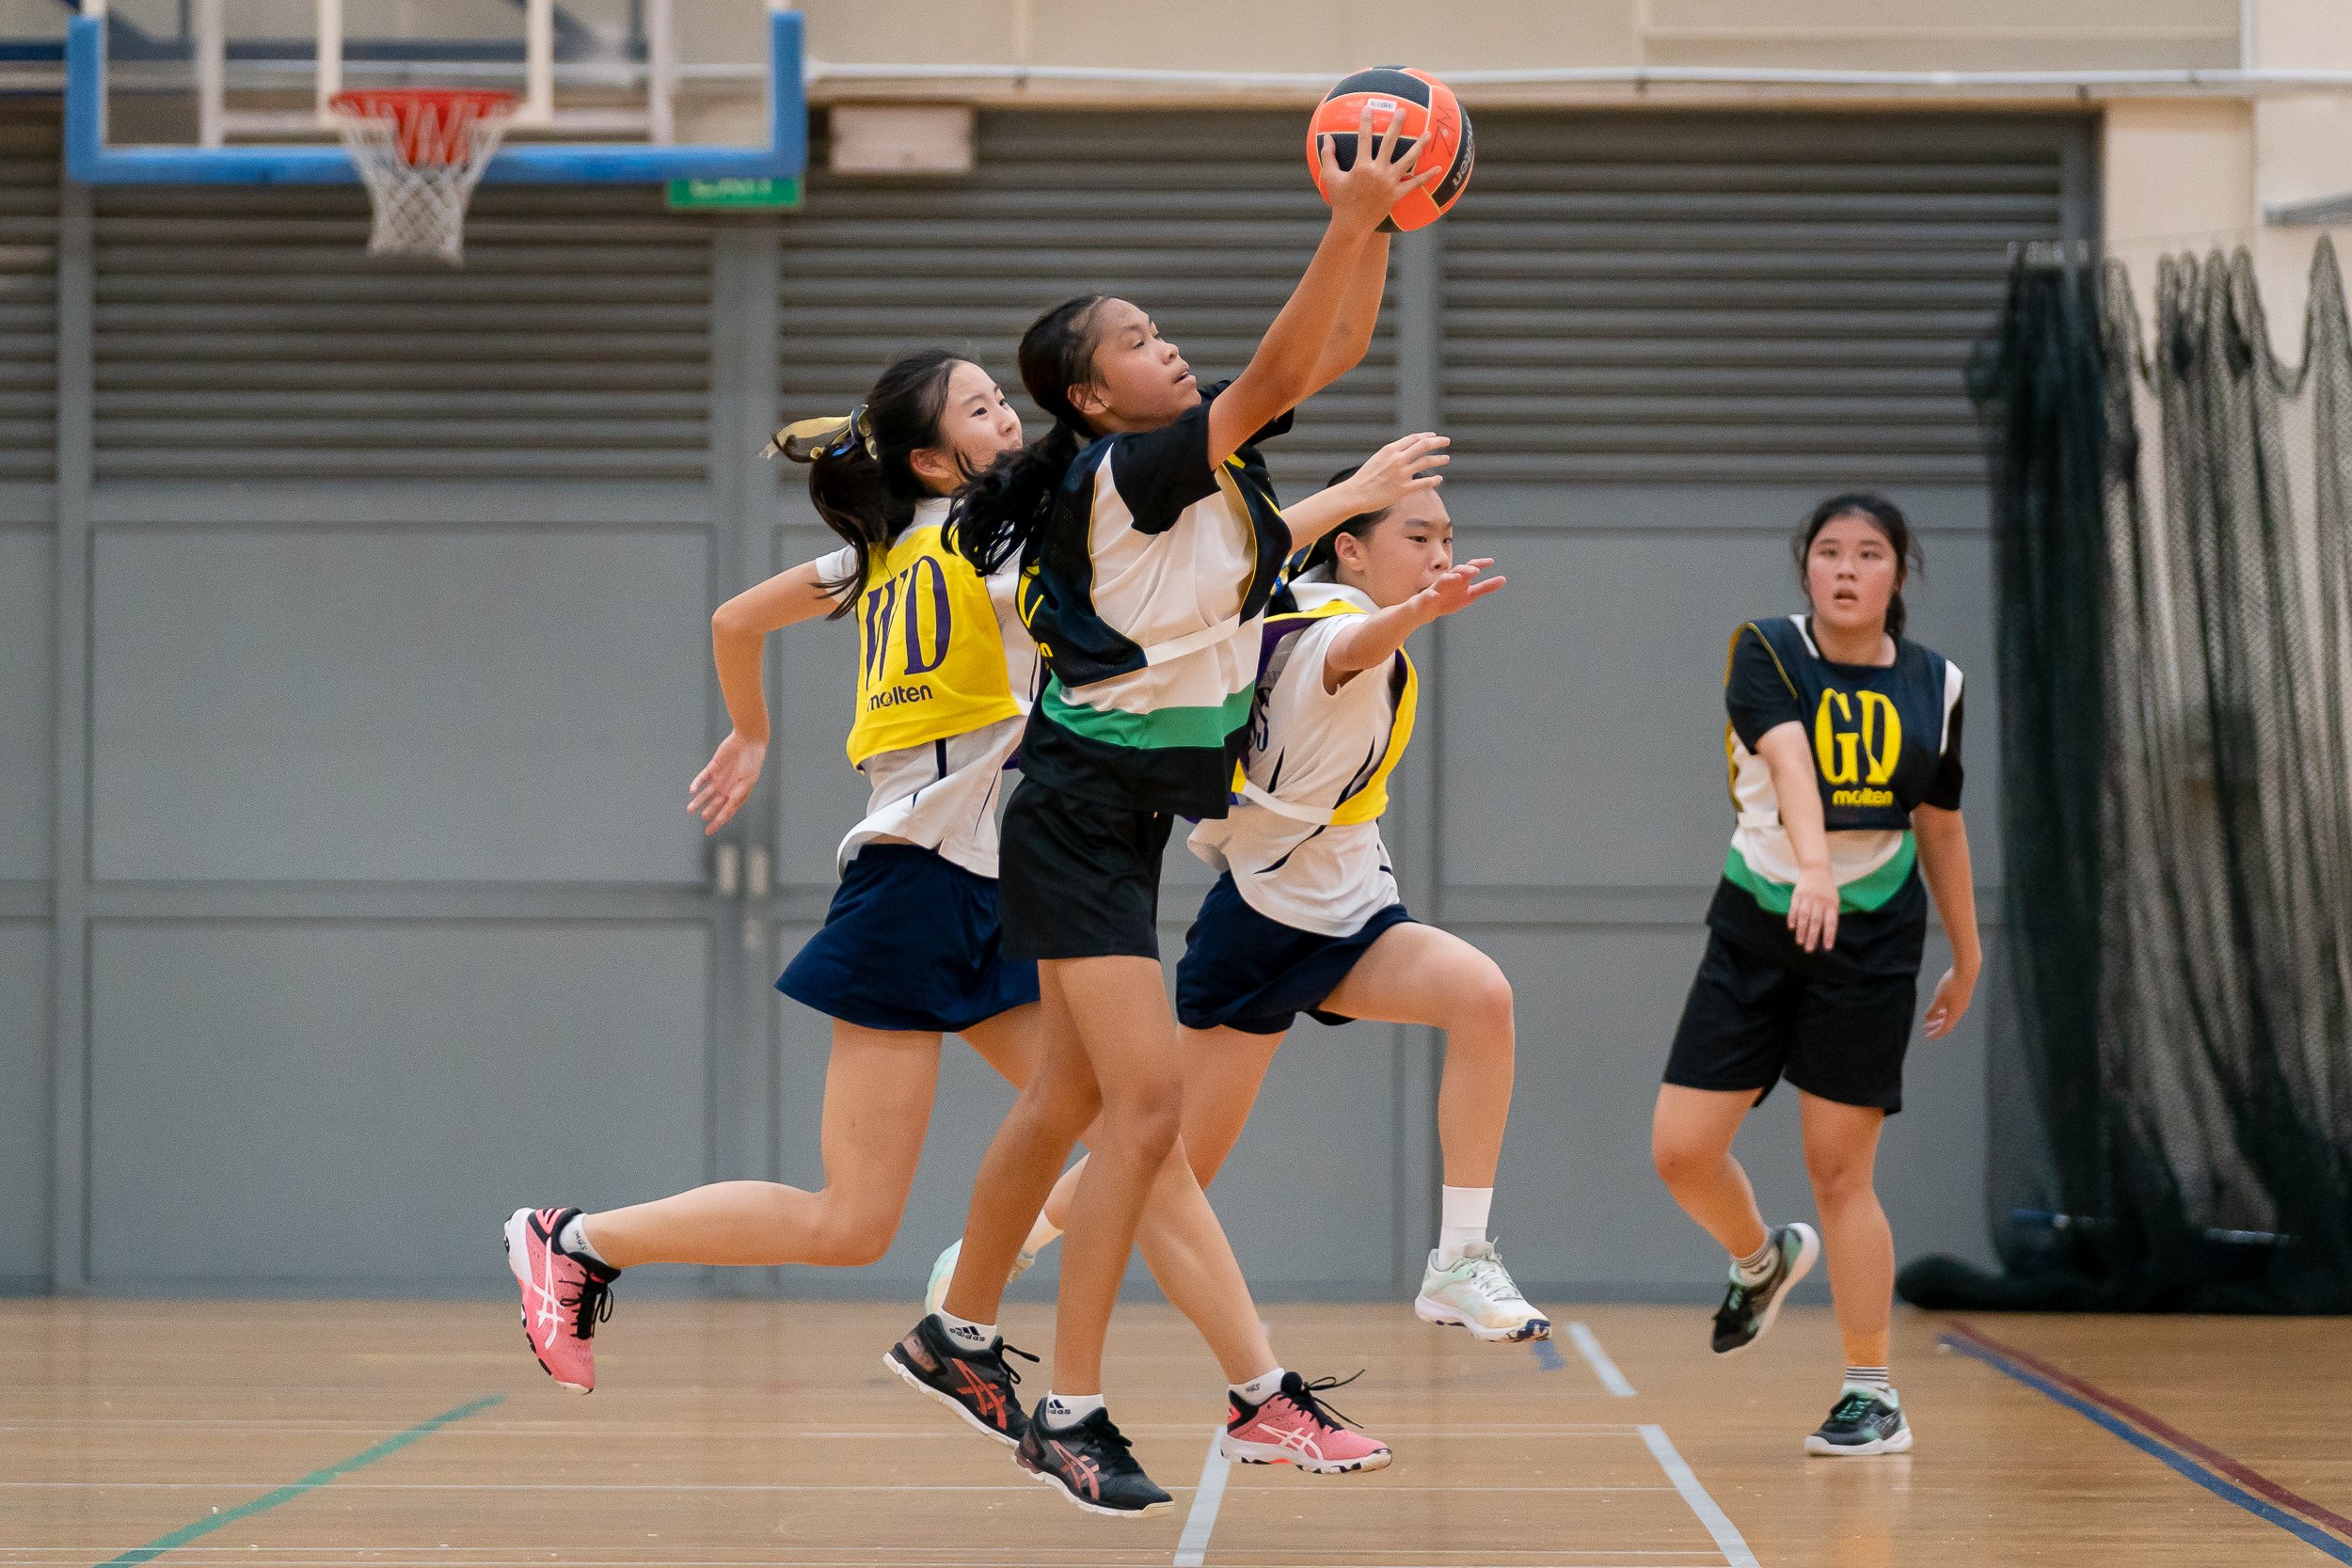 2022-04-28_NSG Netball_Photo By Ron Low_07